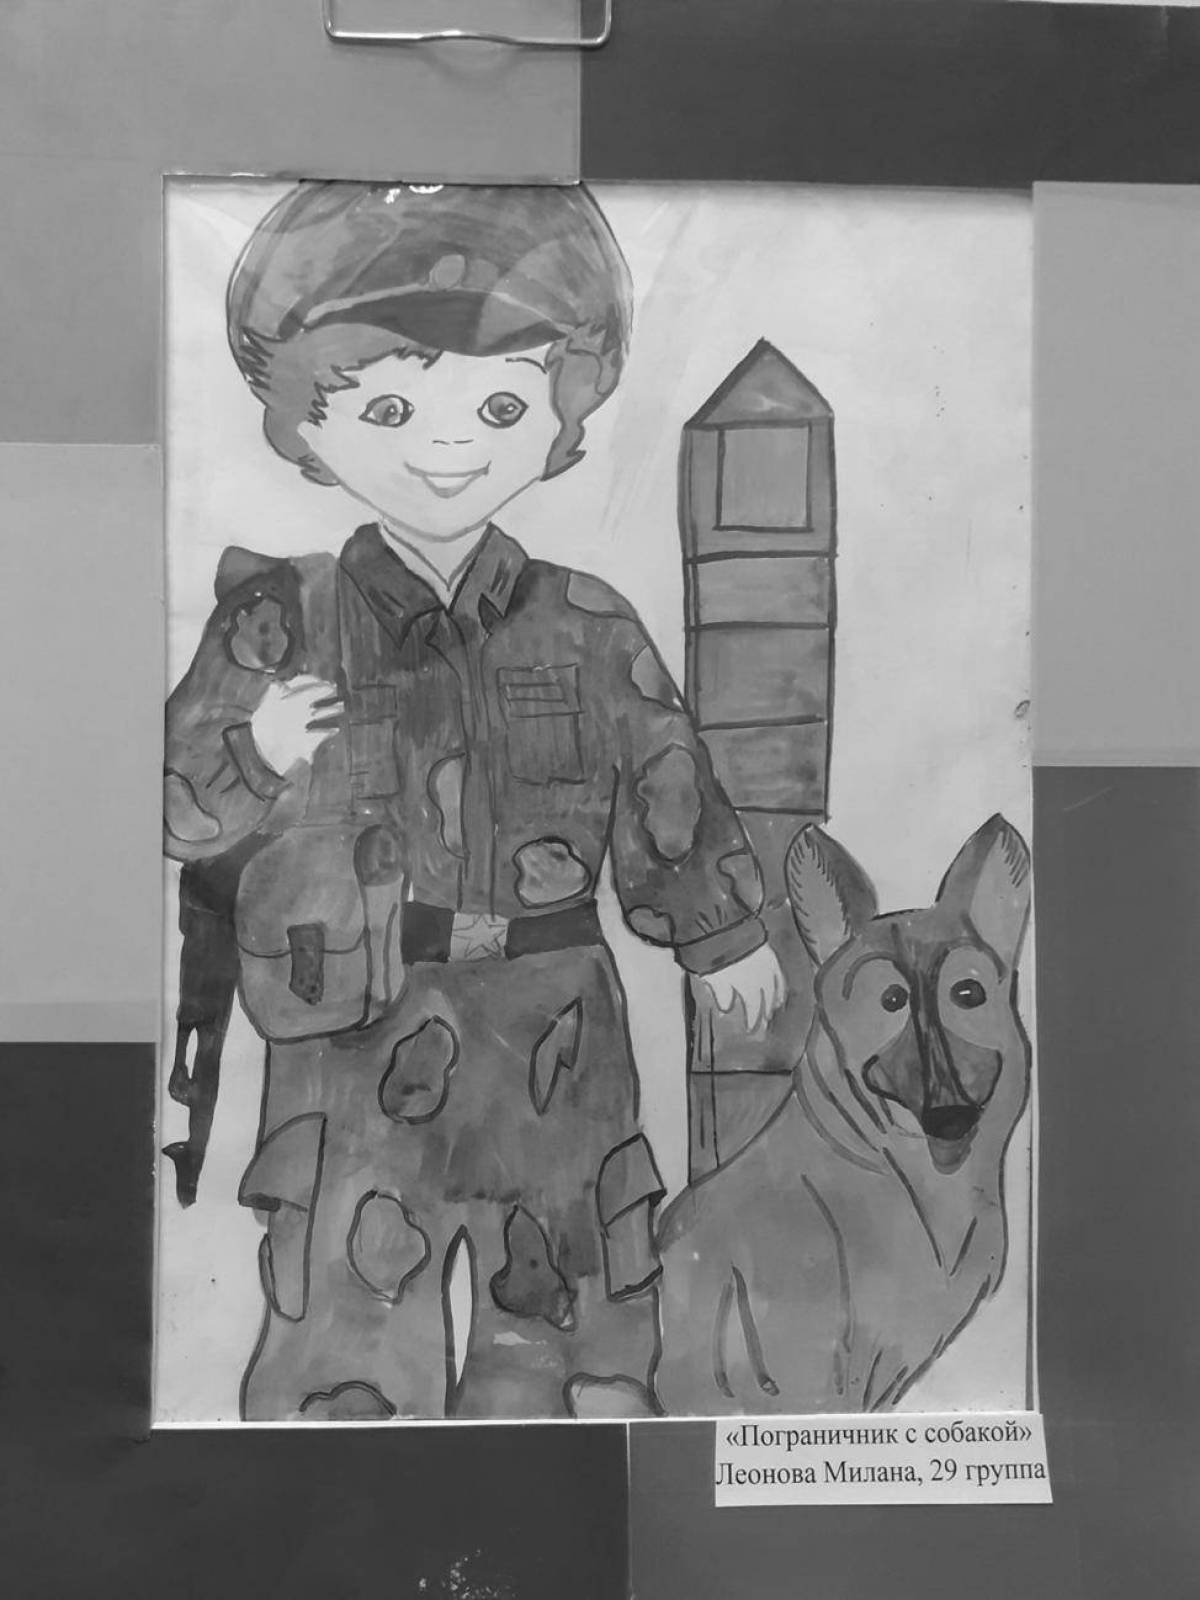 Daring border guard with a dog for children